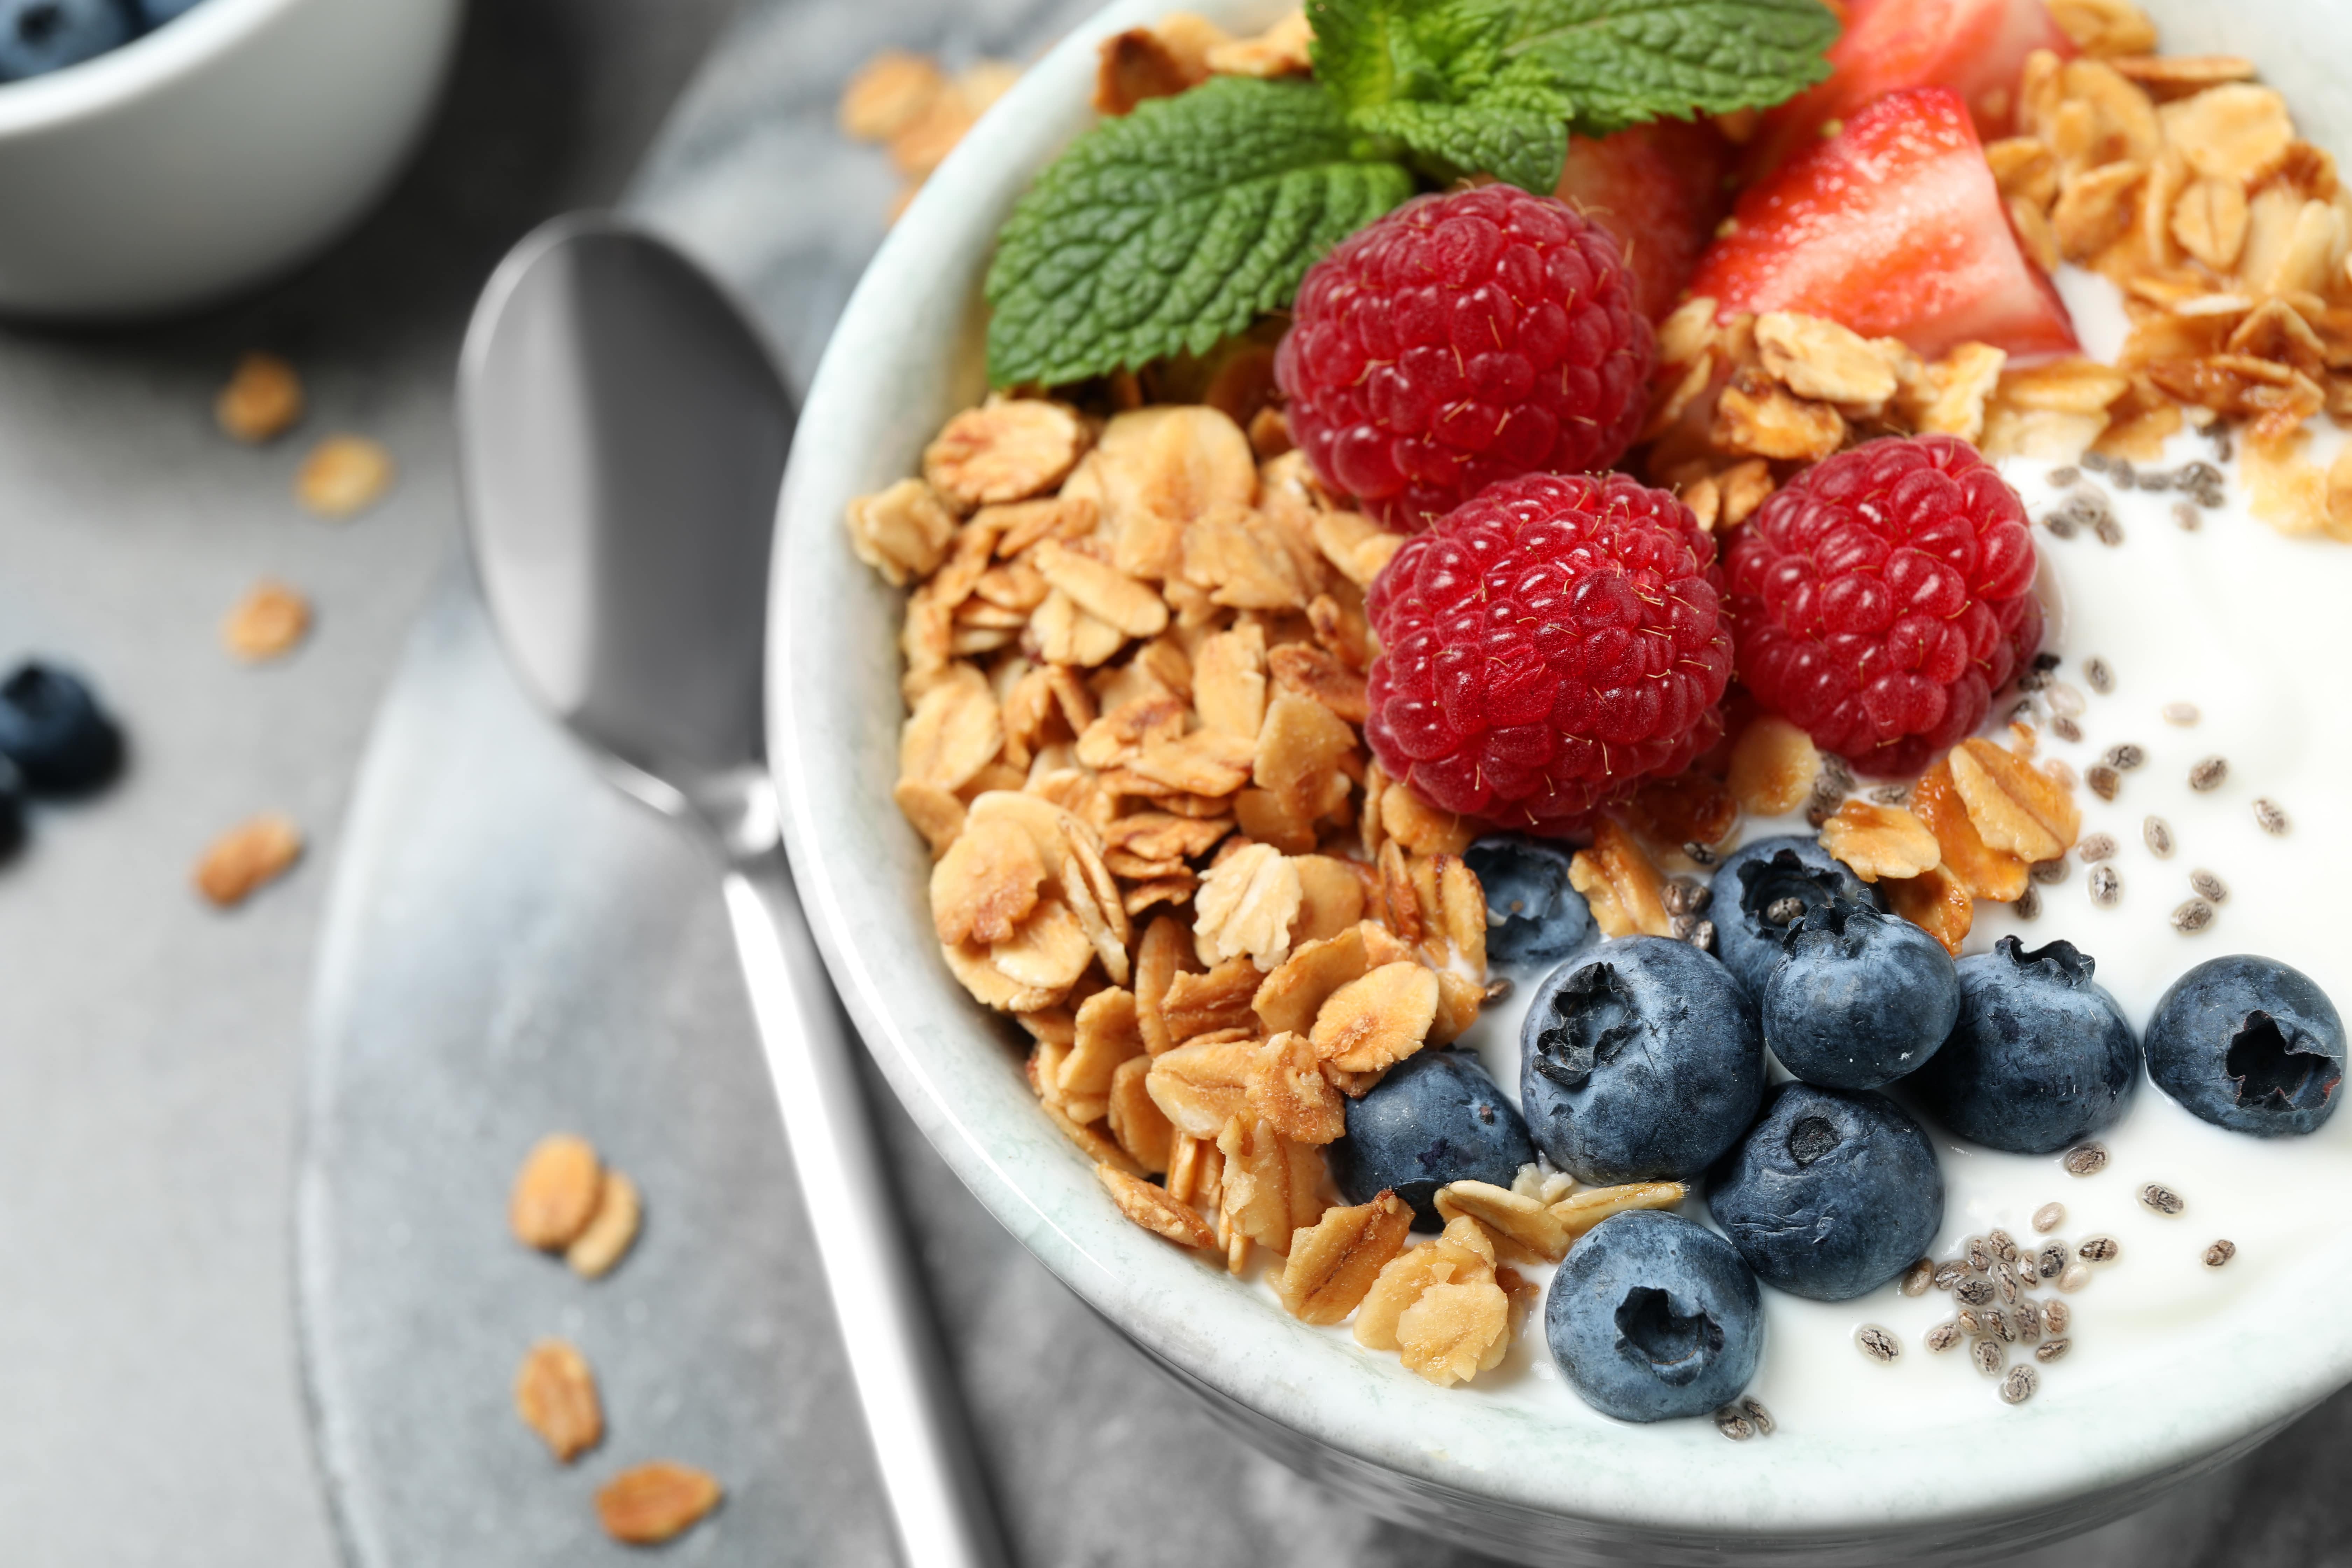 A bowl filled with granola, milk, berries and a sprig of mint with a large spoon beside it.